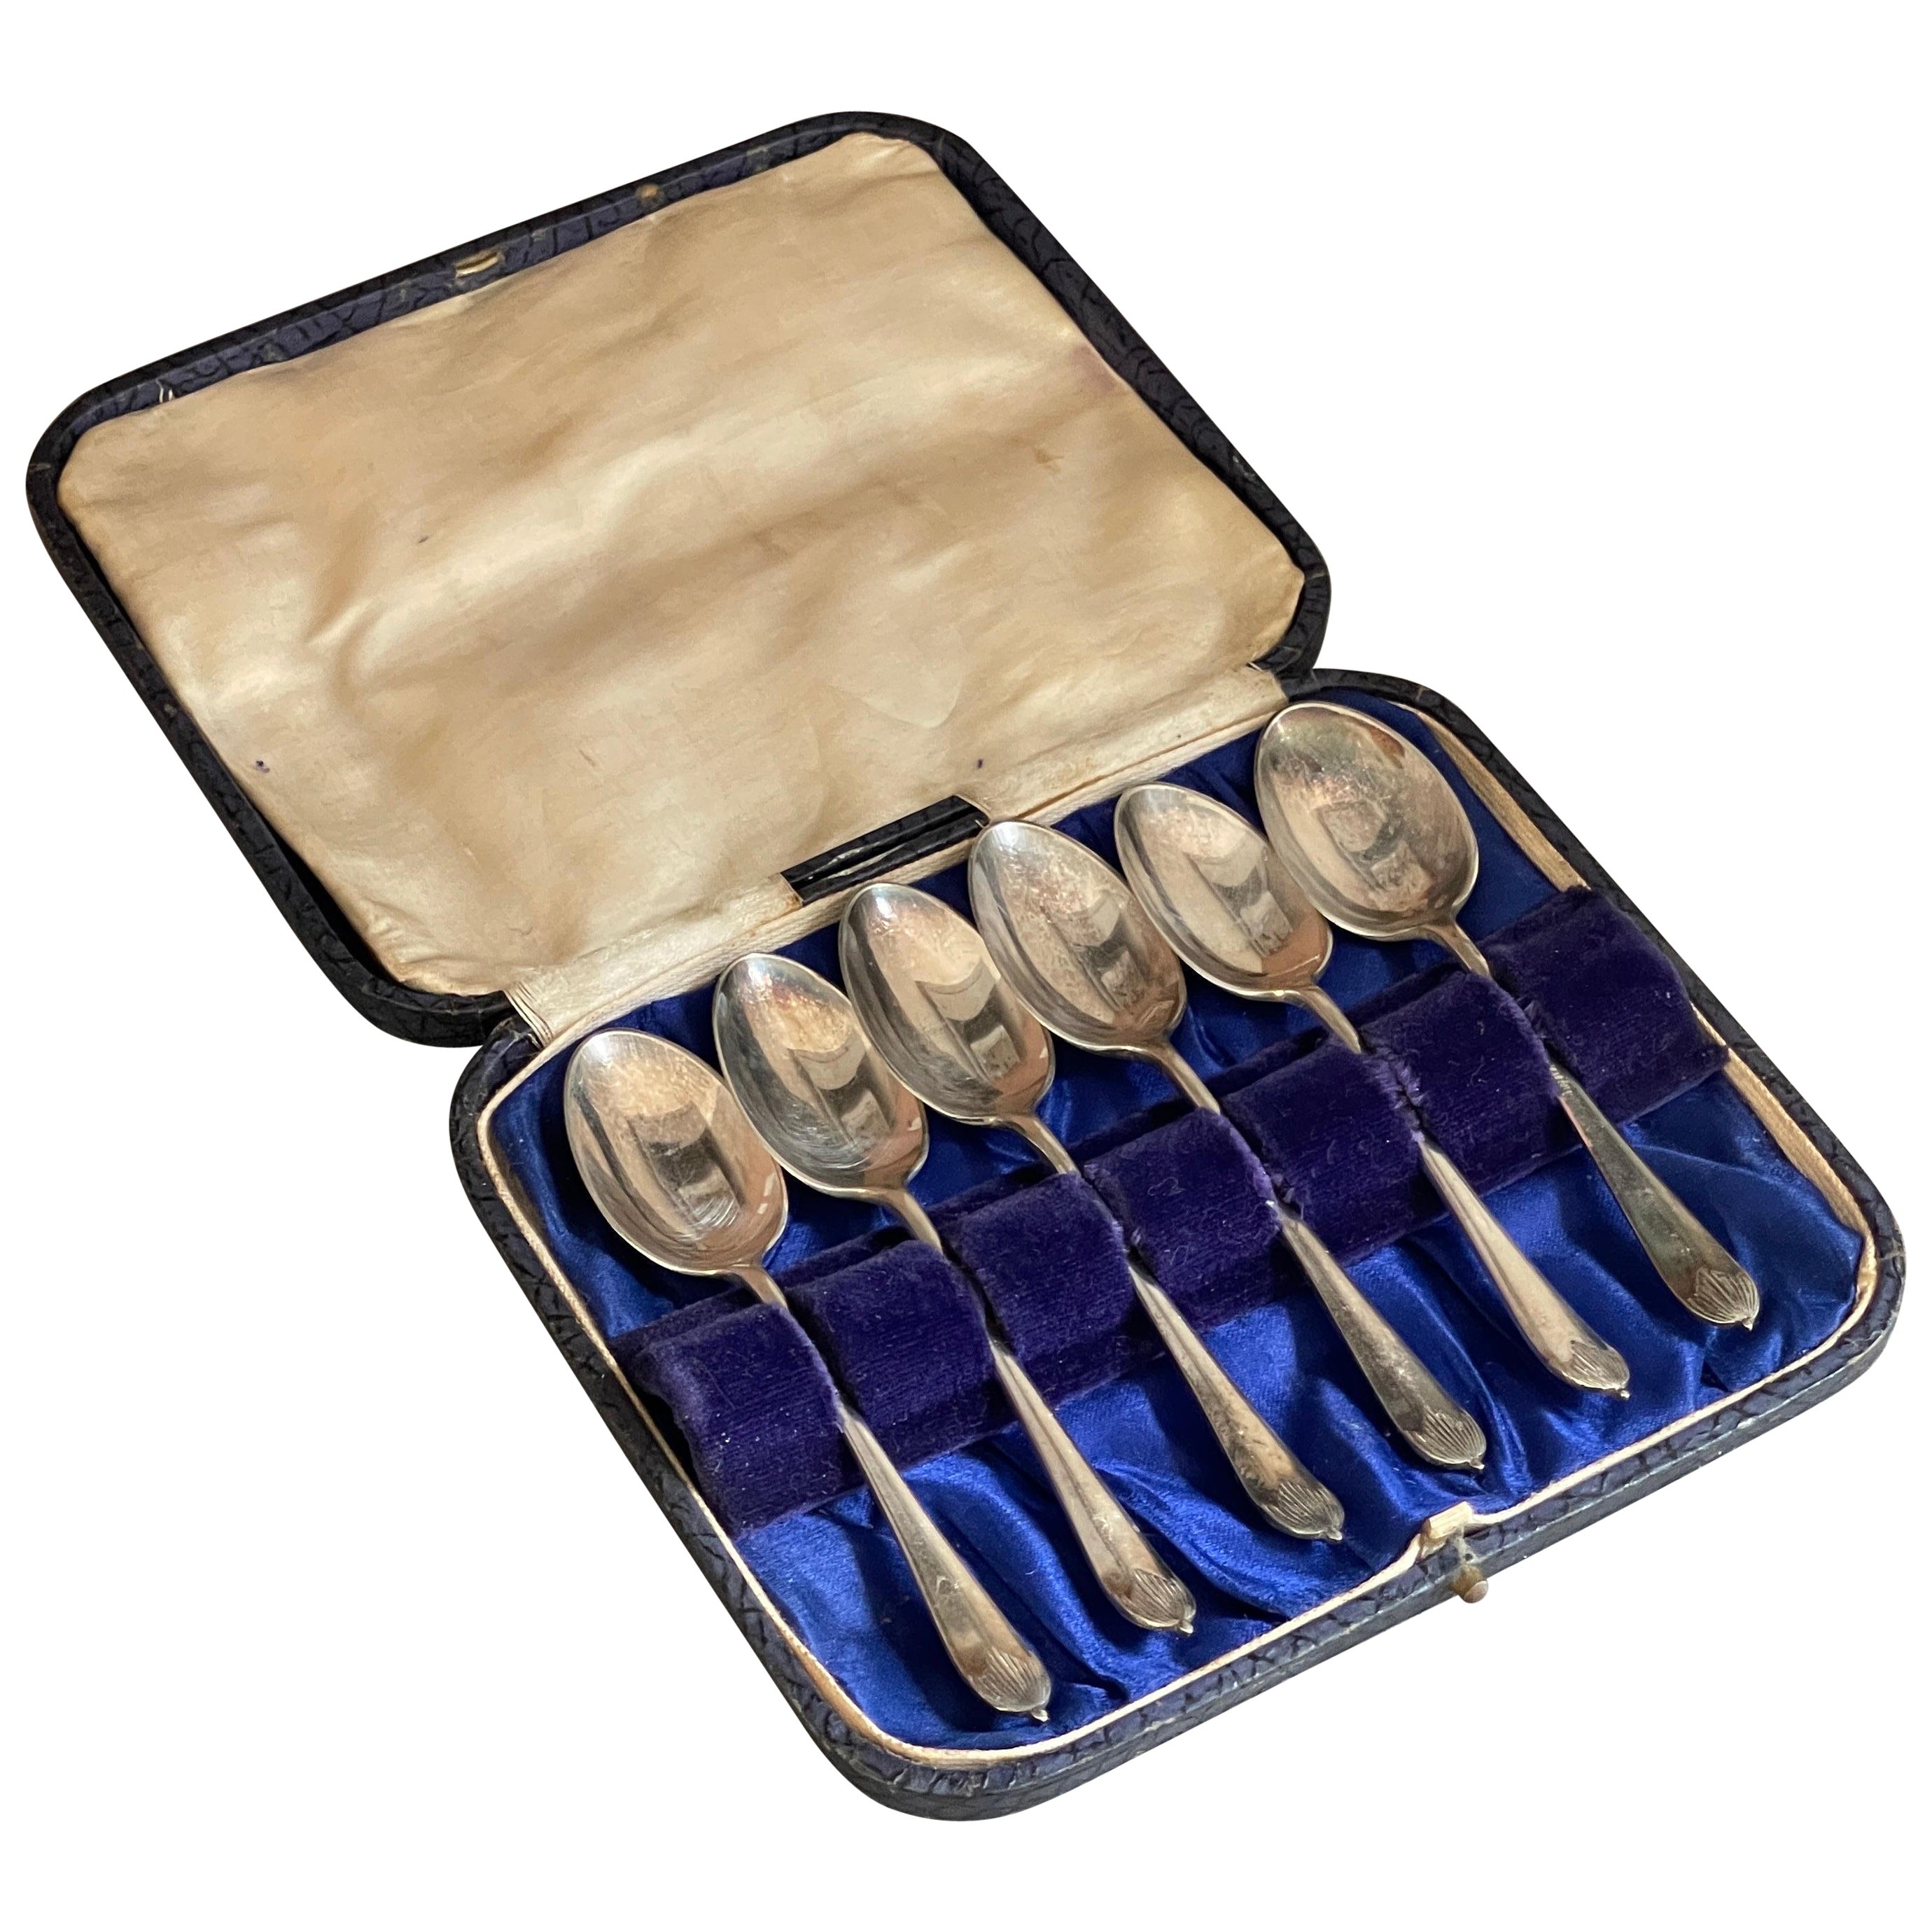 Exclusive Tea COFFEE SPOONS, 6 pcs. Sterling Silver & Box, Antique Silver Spoons